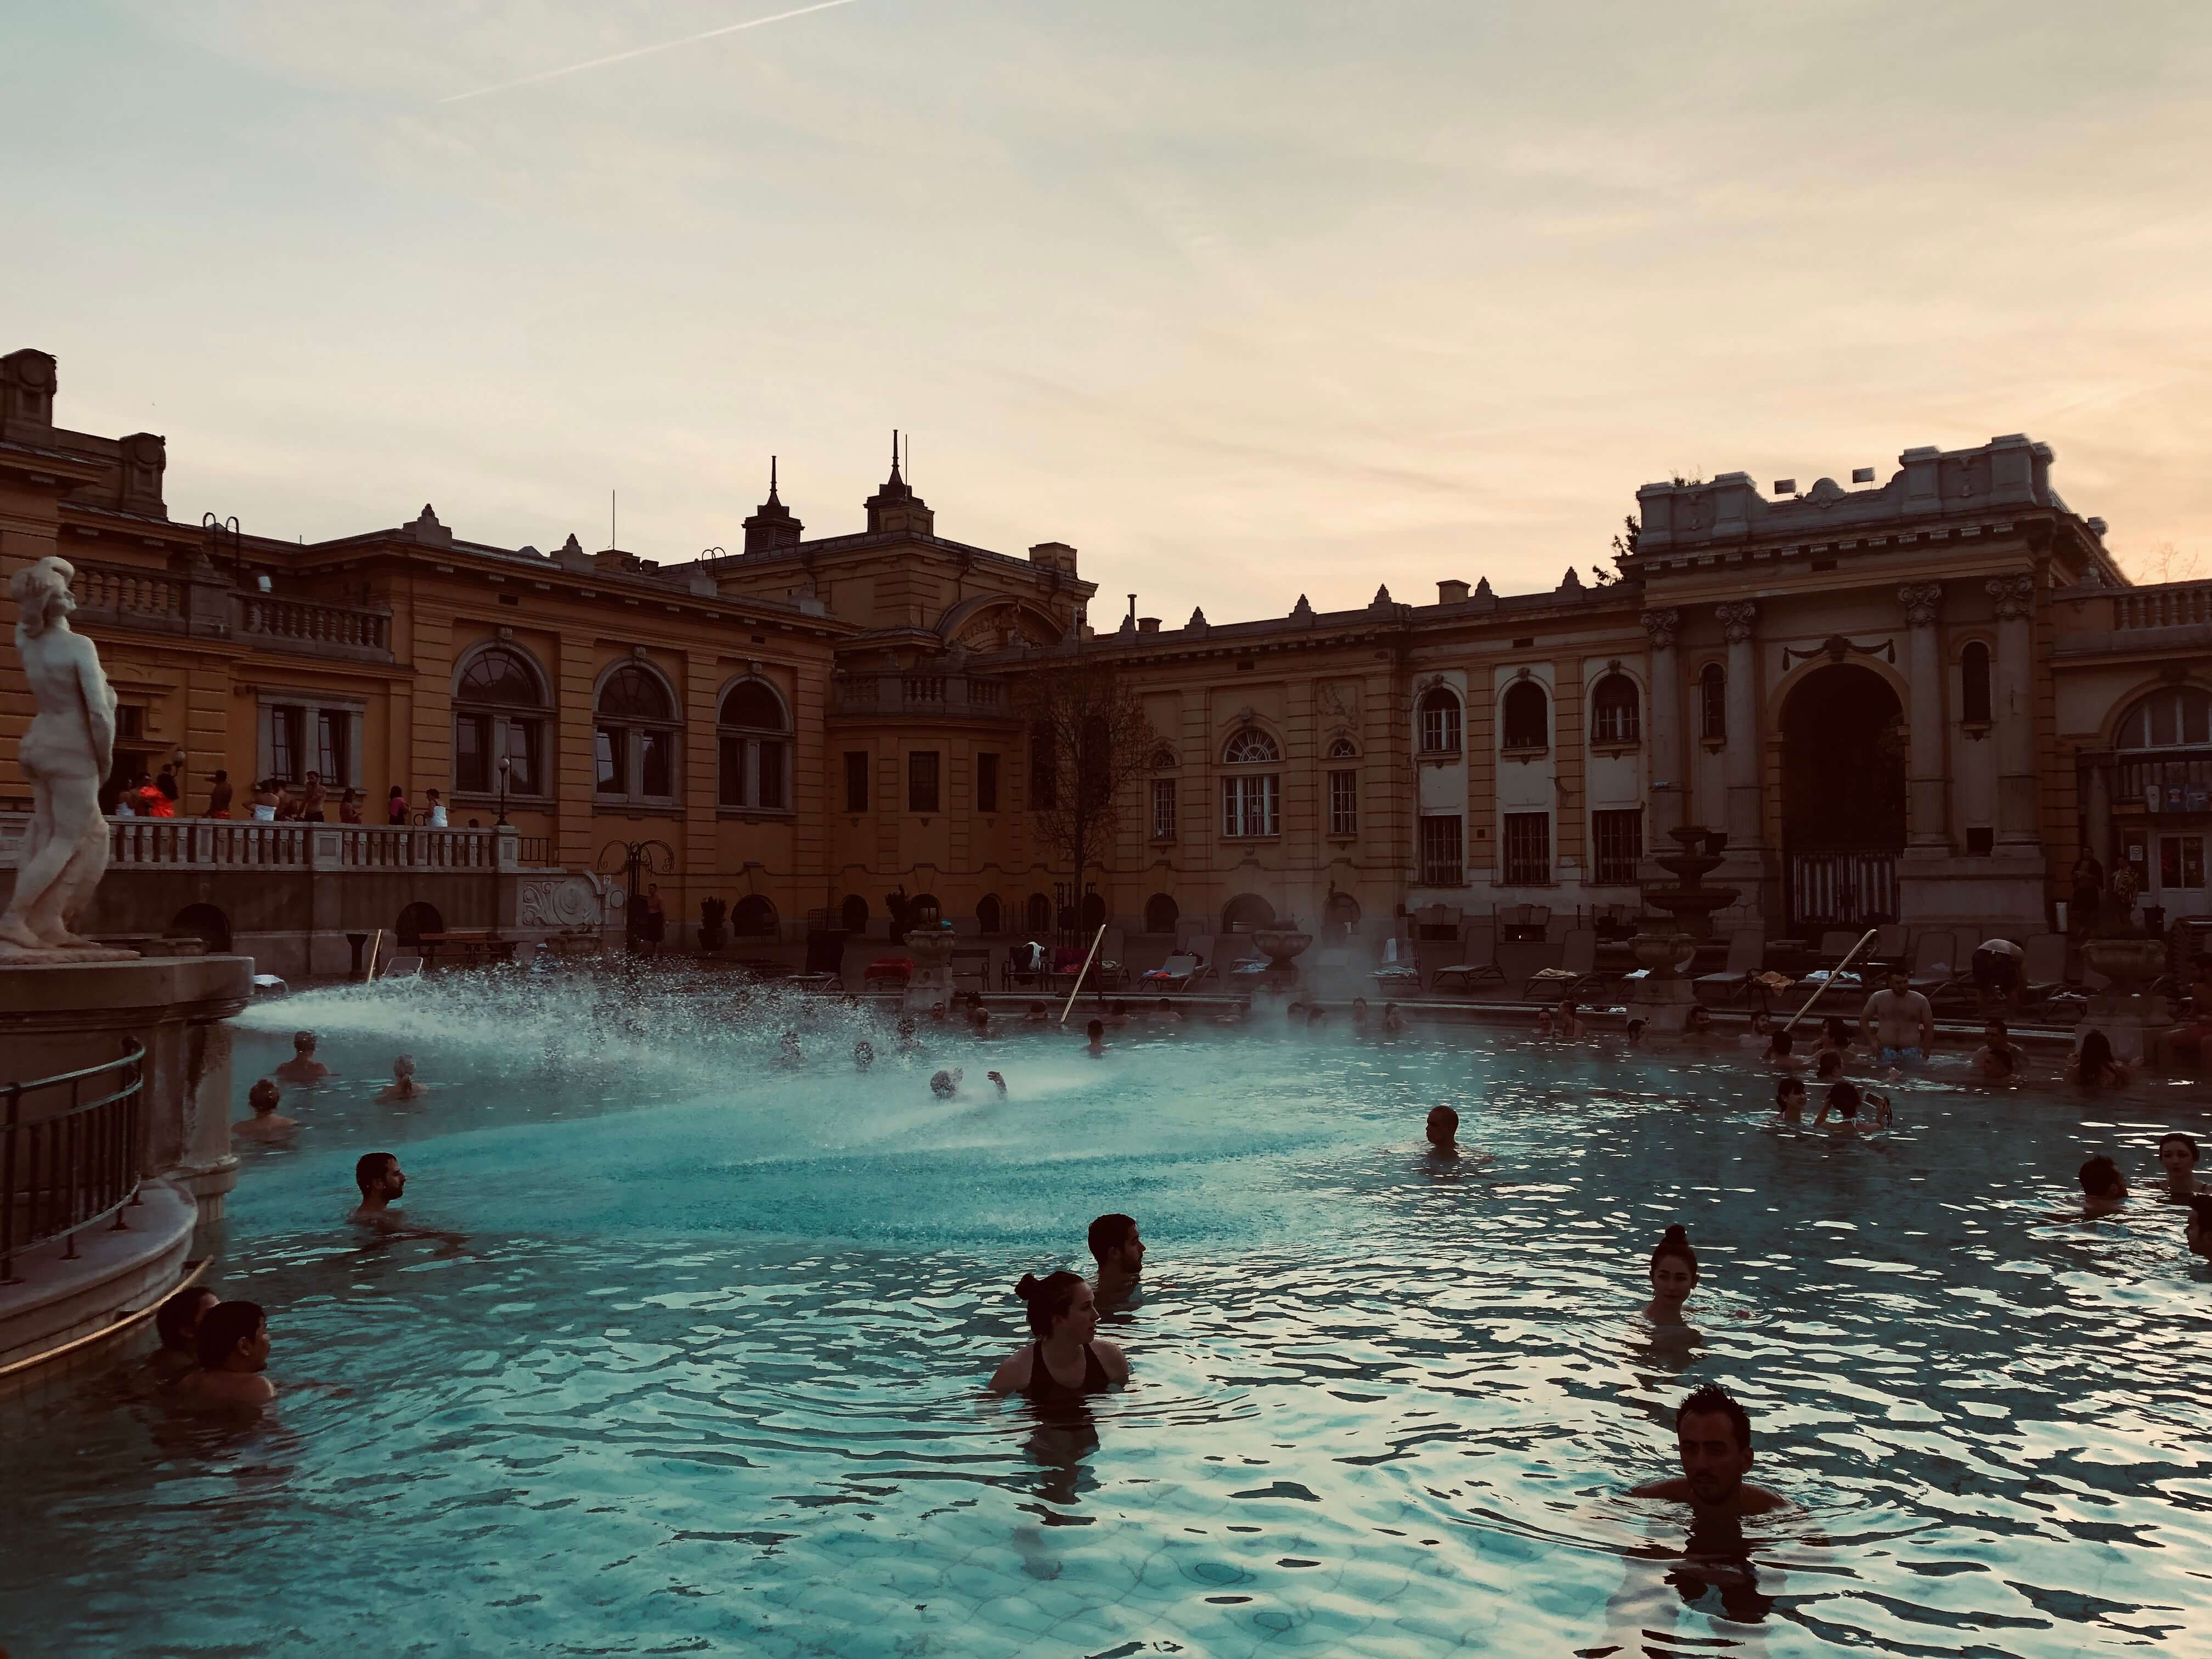 Szechenyi Spa thermal baths are amazing check out this photo